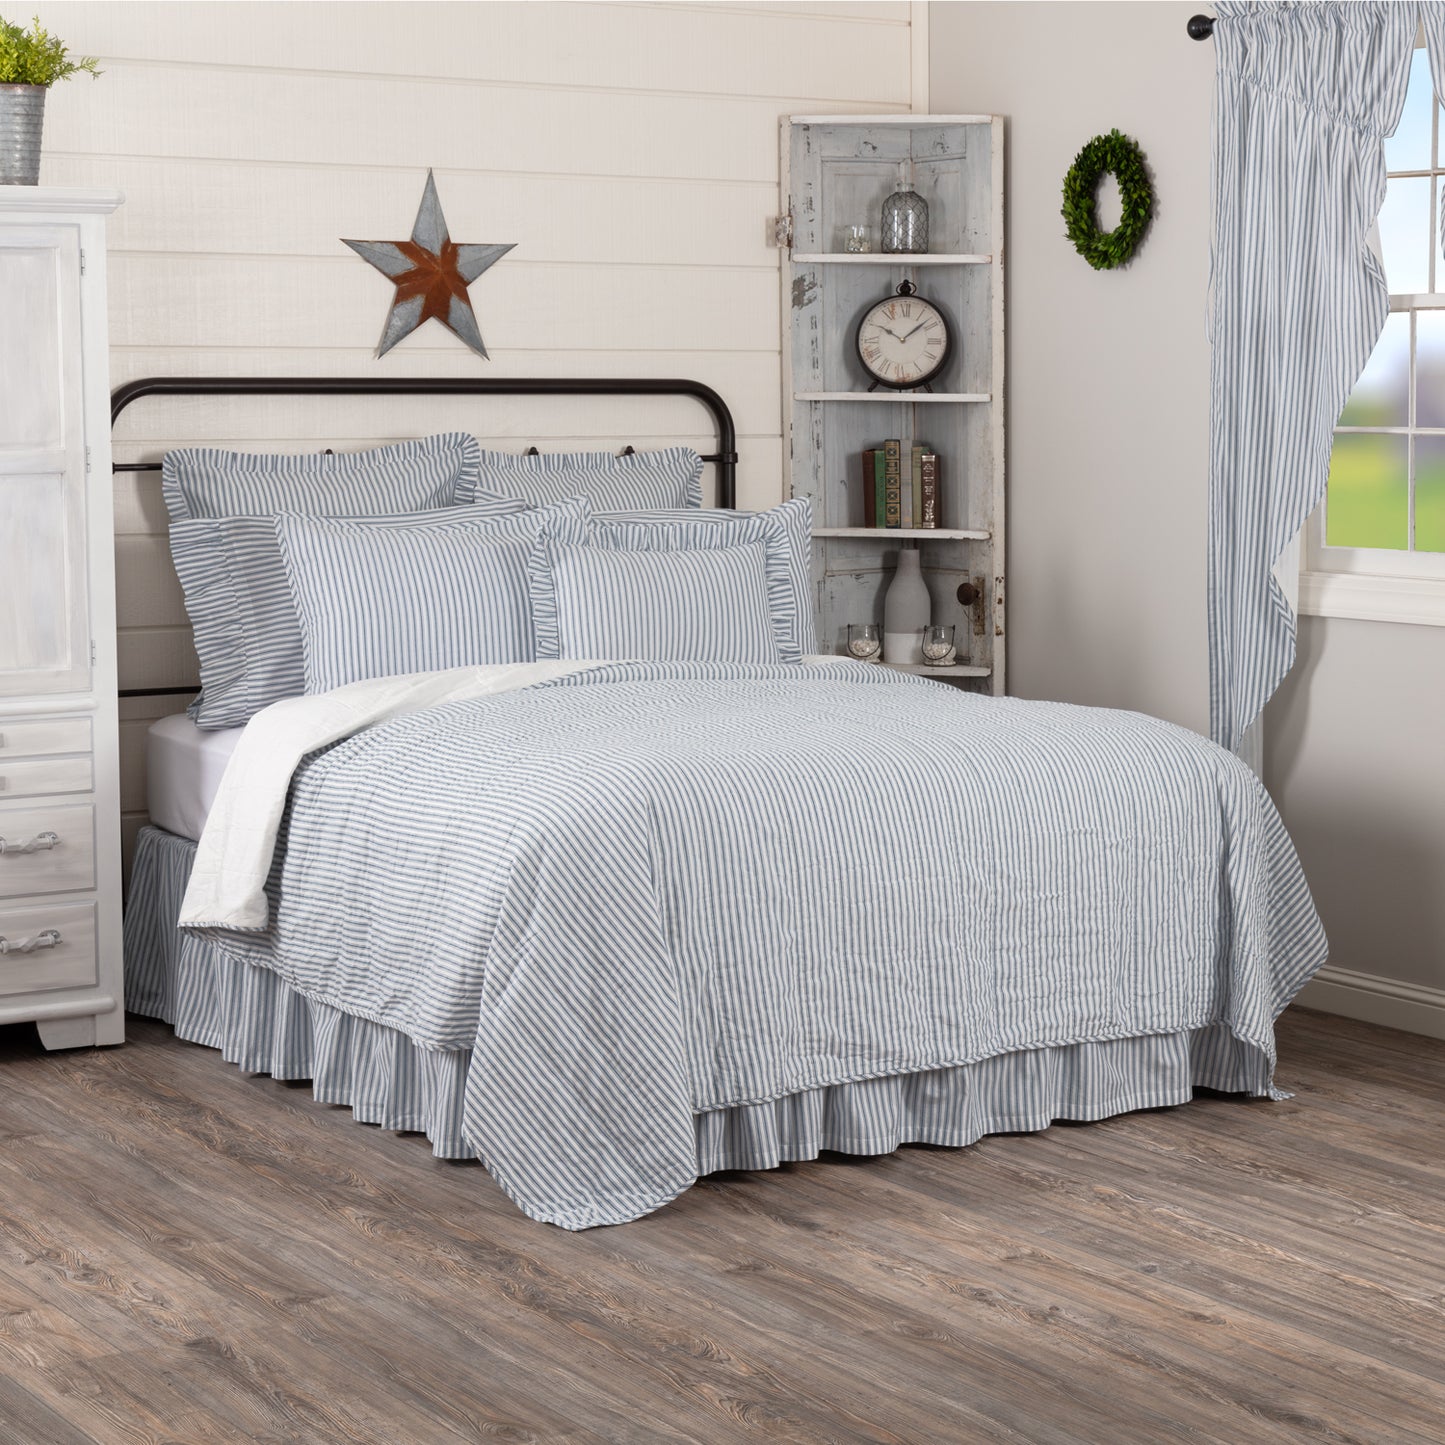 51904-Sawyer-Mill-Blue-Ticking-Stripe-Twin-Quilt-Coverlet-68Wx86L-image-3